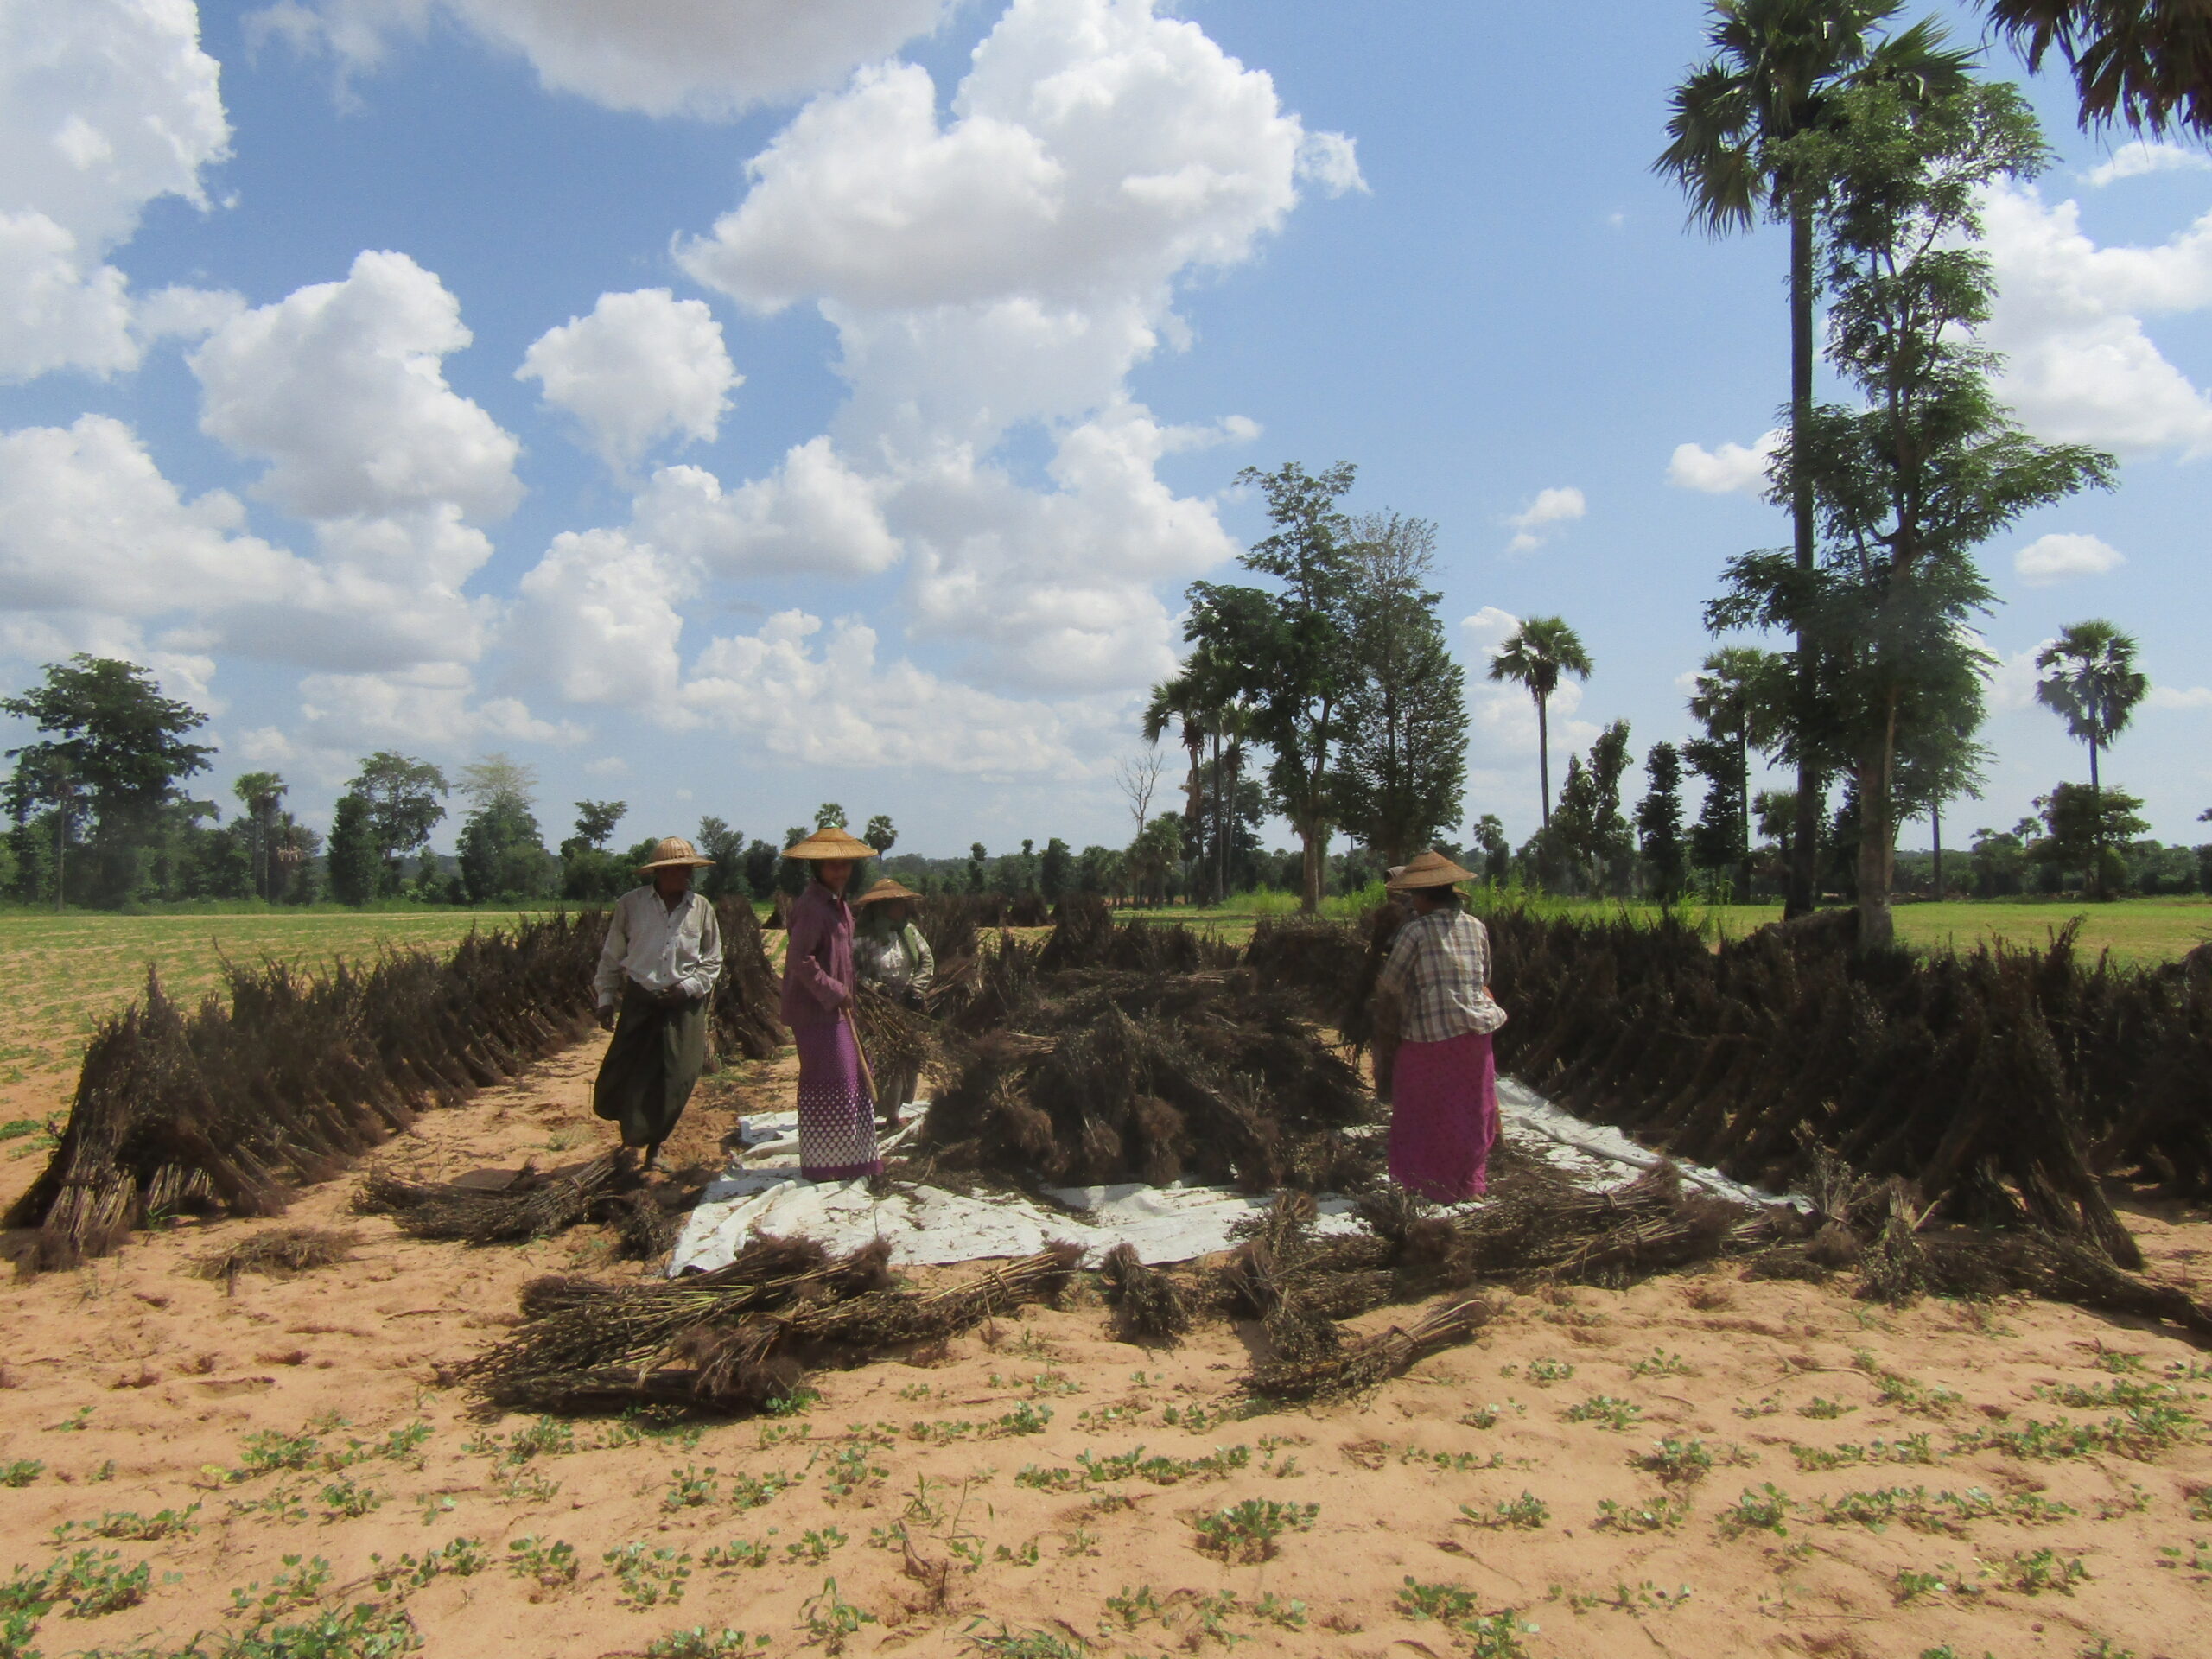 A group of farmers in the Dry Zone, Myanmar.